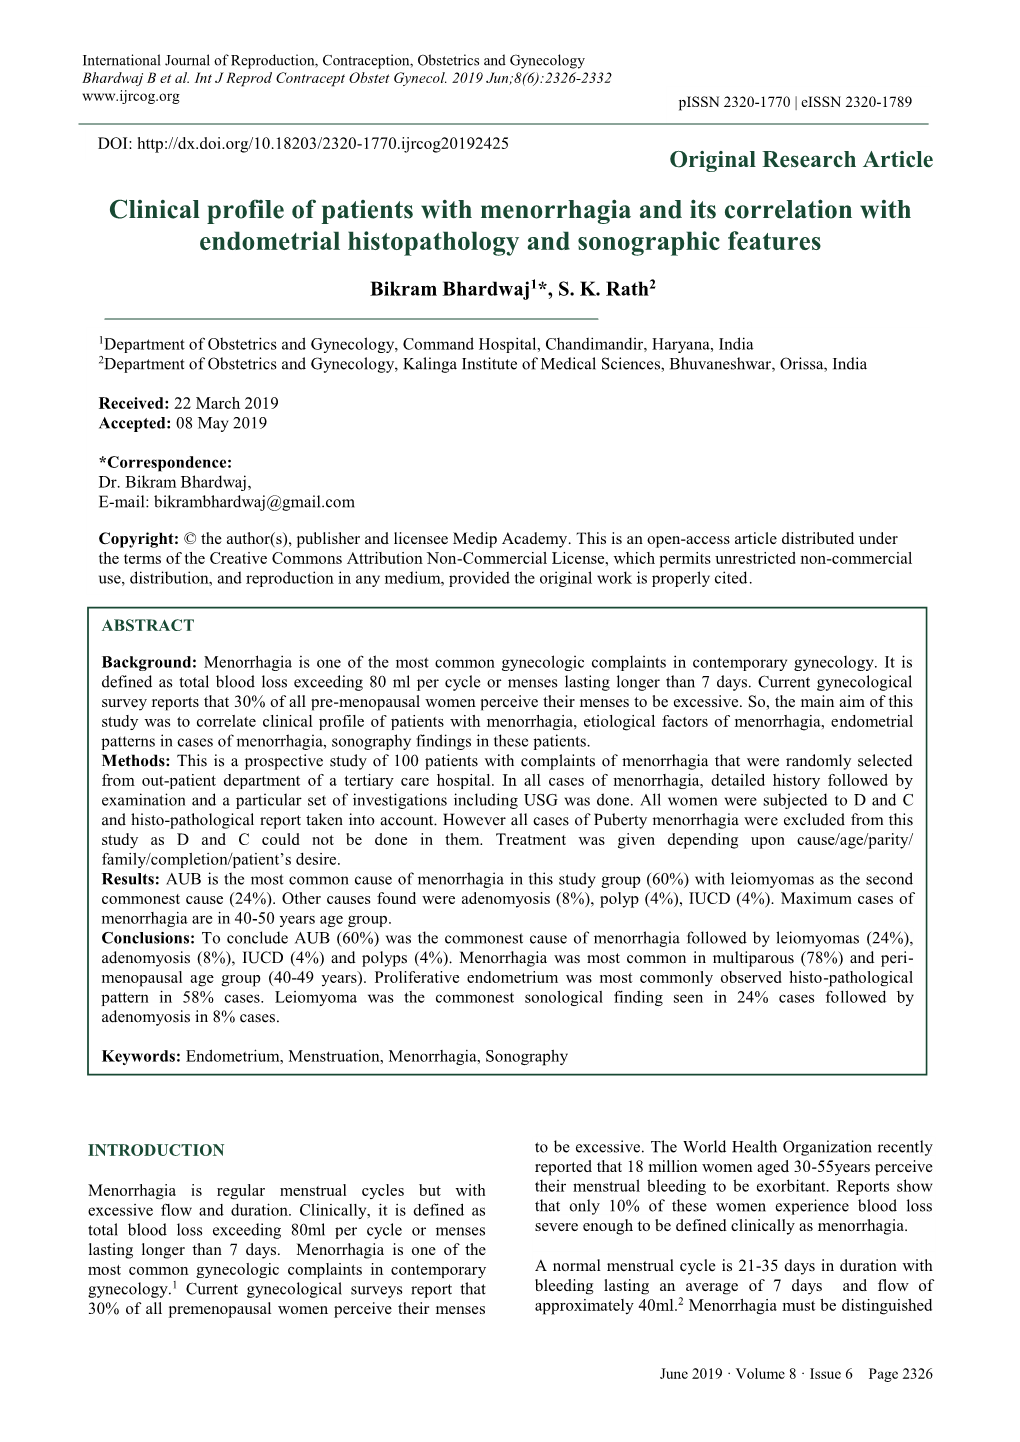 Clinical Profile of Patients with Menorrhagia and Its Correlation with Endometrial Histopathology and Sonographic Features